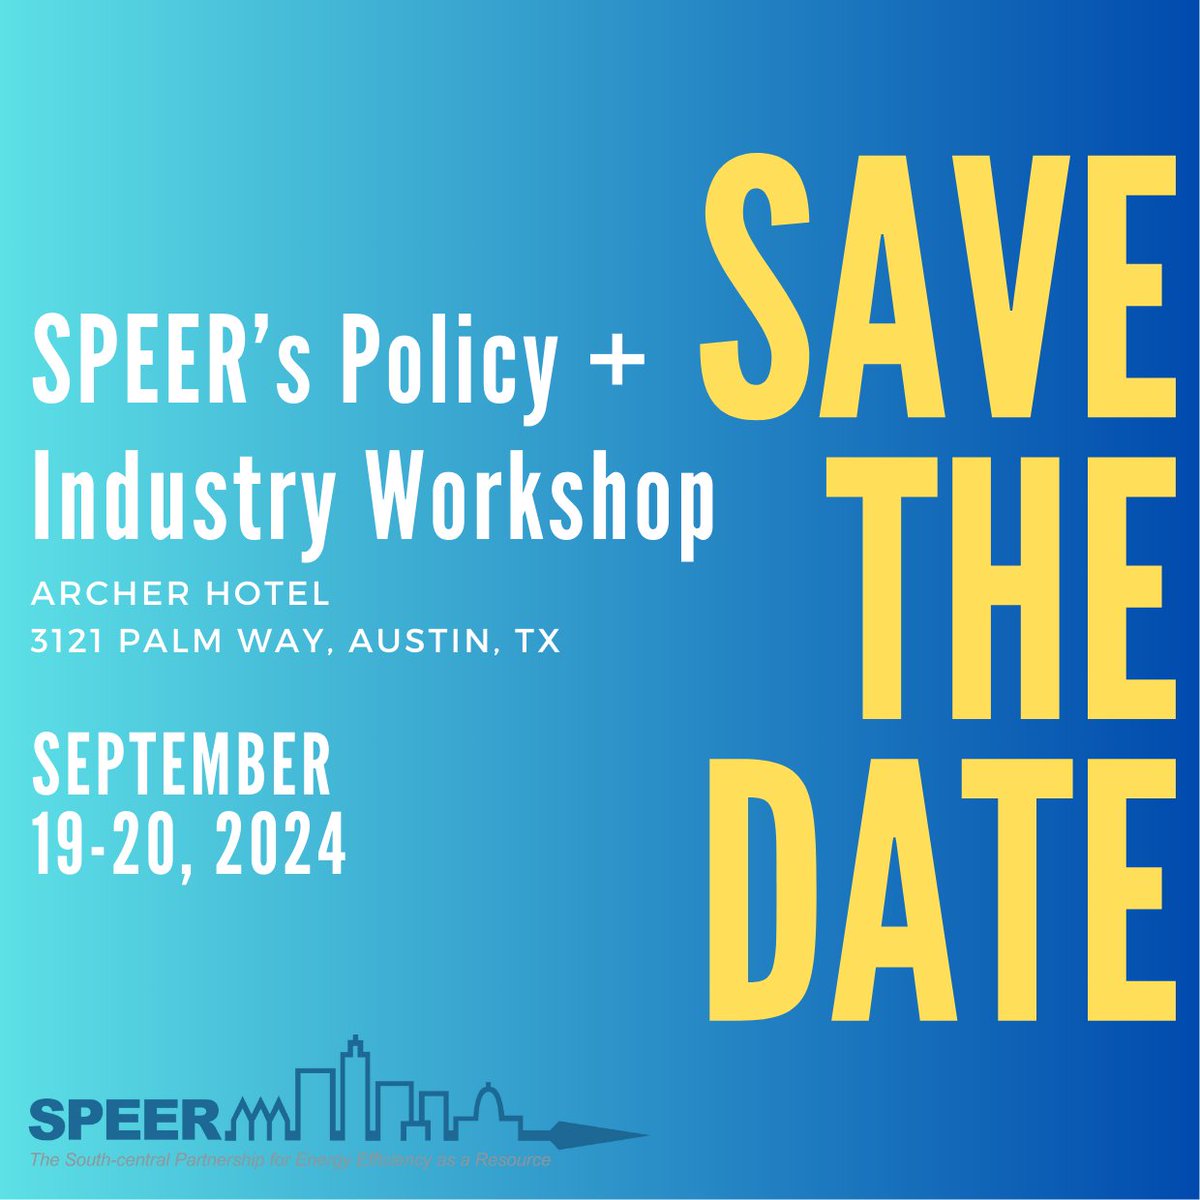 This year's SPEER Industry + Policy Workshop will be held in Austin at the Archer Hotel on September 19-20th. Take a look at our event page to browse sponsorship opportunities and save your spot. We look forward to seeing you in the fall! ow.ly/T3av50RqPqz